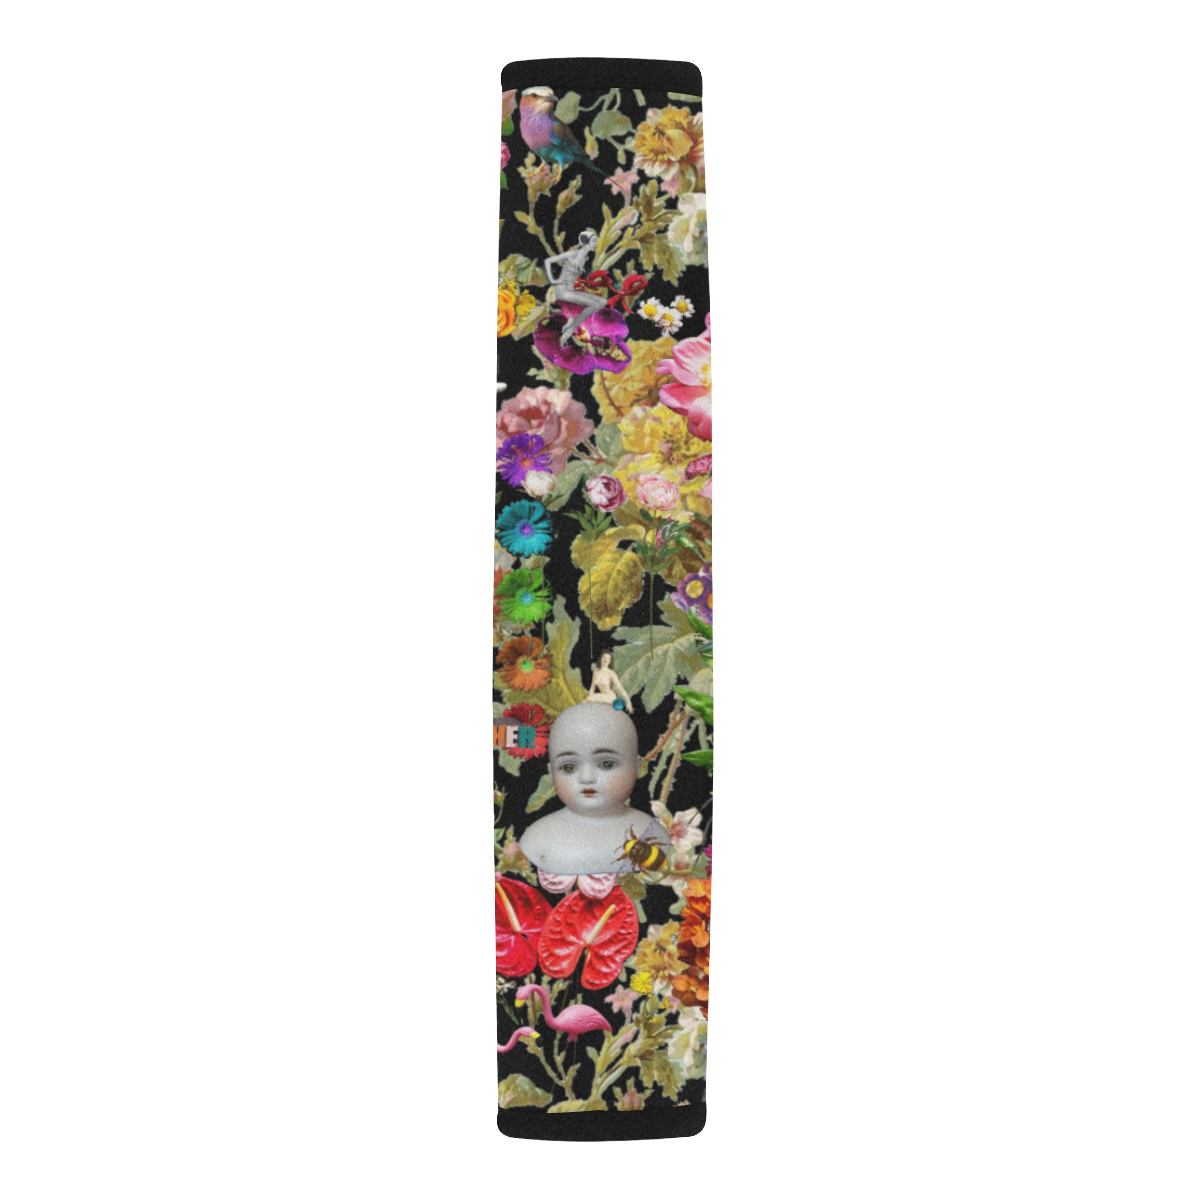 Let me Count the Ways Car Seat Belt Cover 7''x12.6''